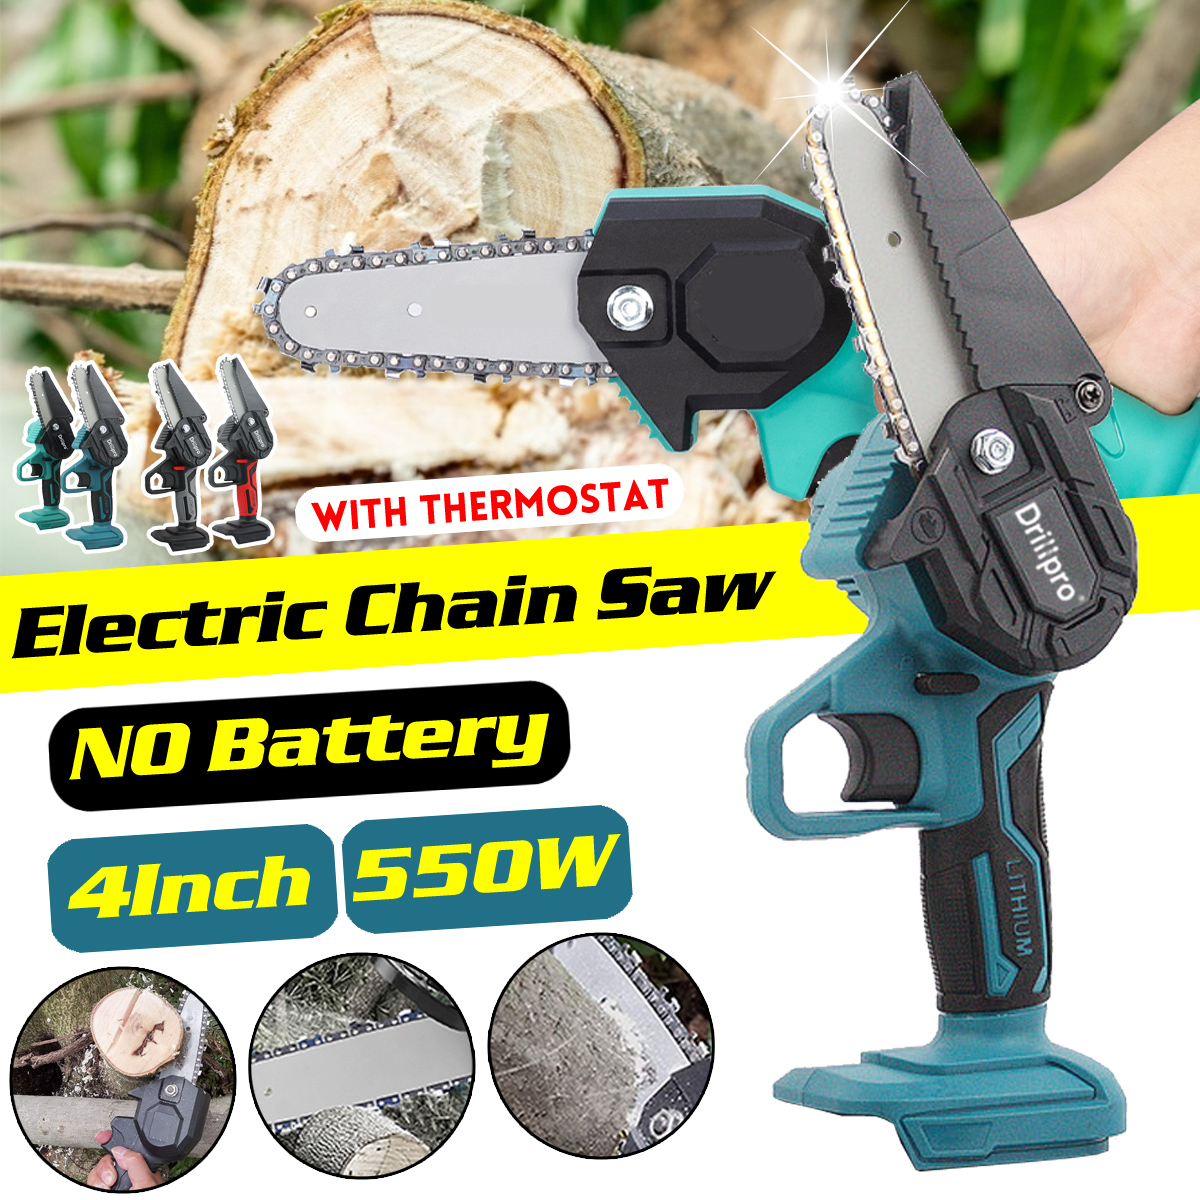 Drillpro-4-Inch-Electric-Chain-Saw-Portable-One-hand-Saw-Wood-Cutter-for-Makita-18V-Battery-1804667-2